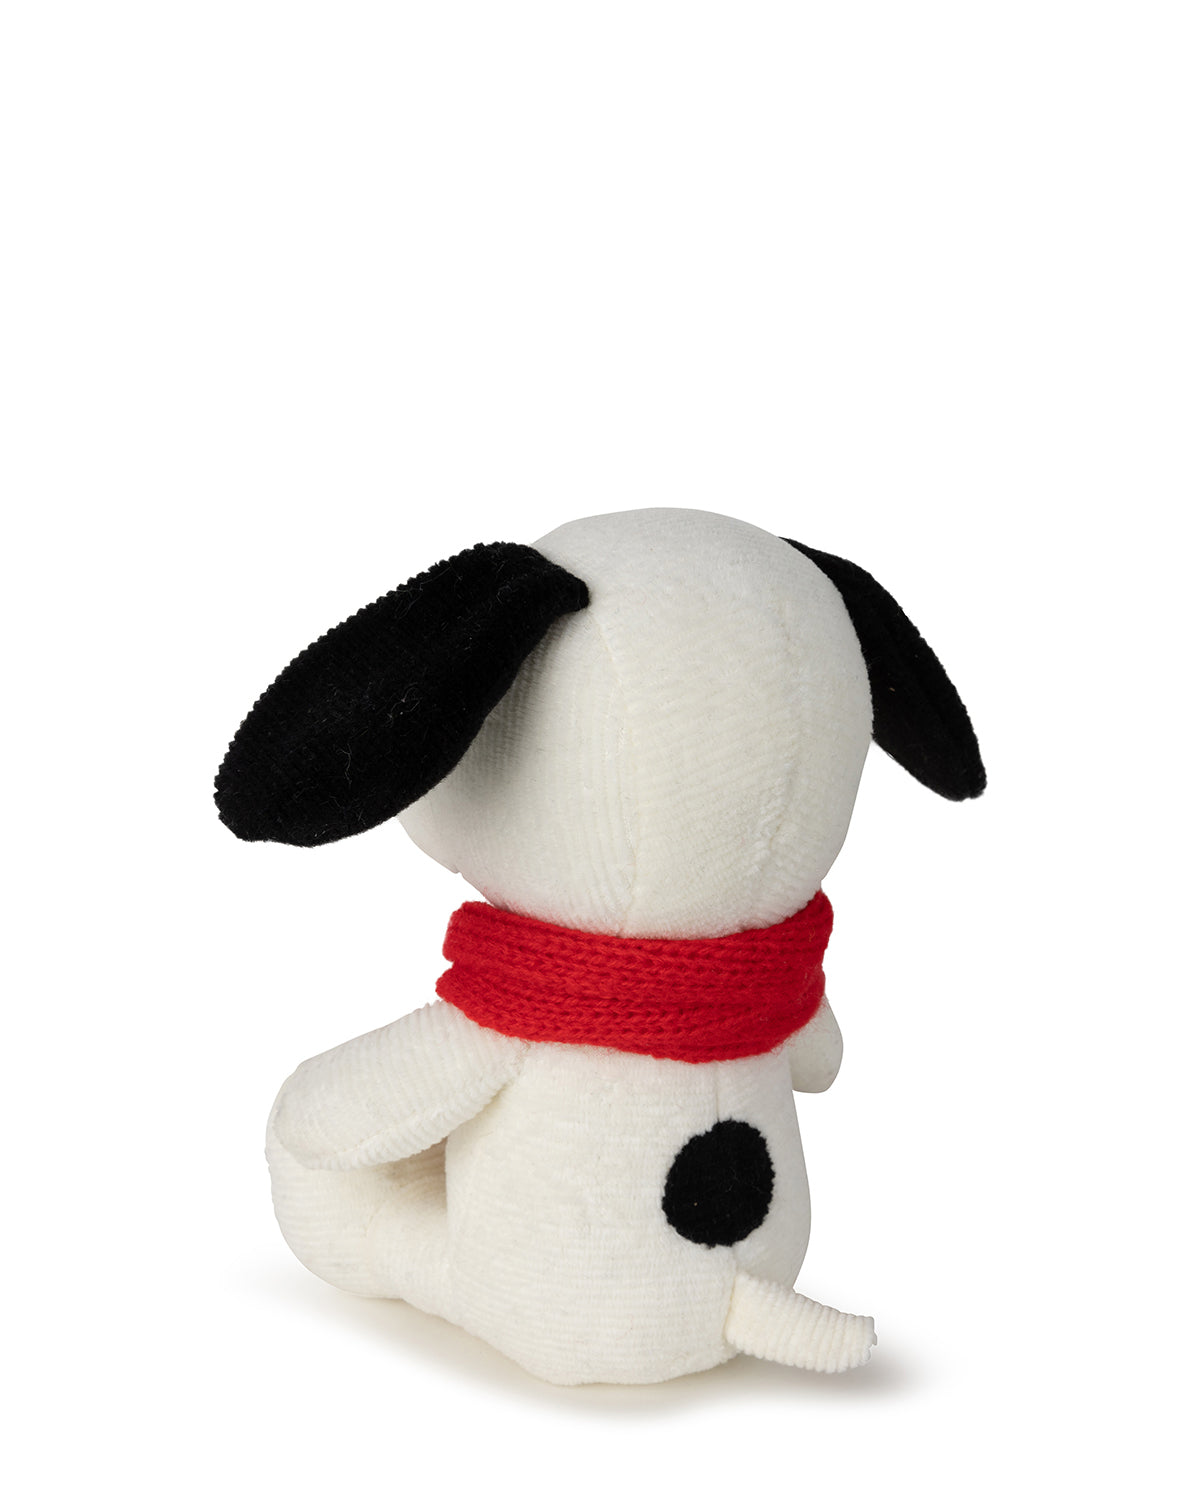 Bon Ton Toys Plush PEANUTS SNOOPY Sitting 7 and 7.5 from the